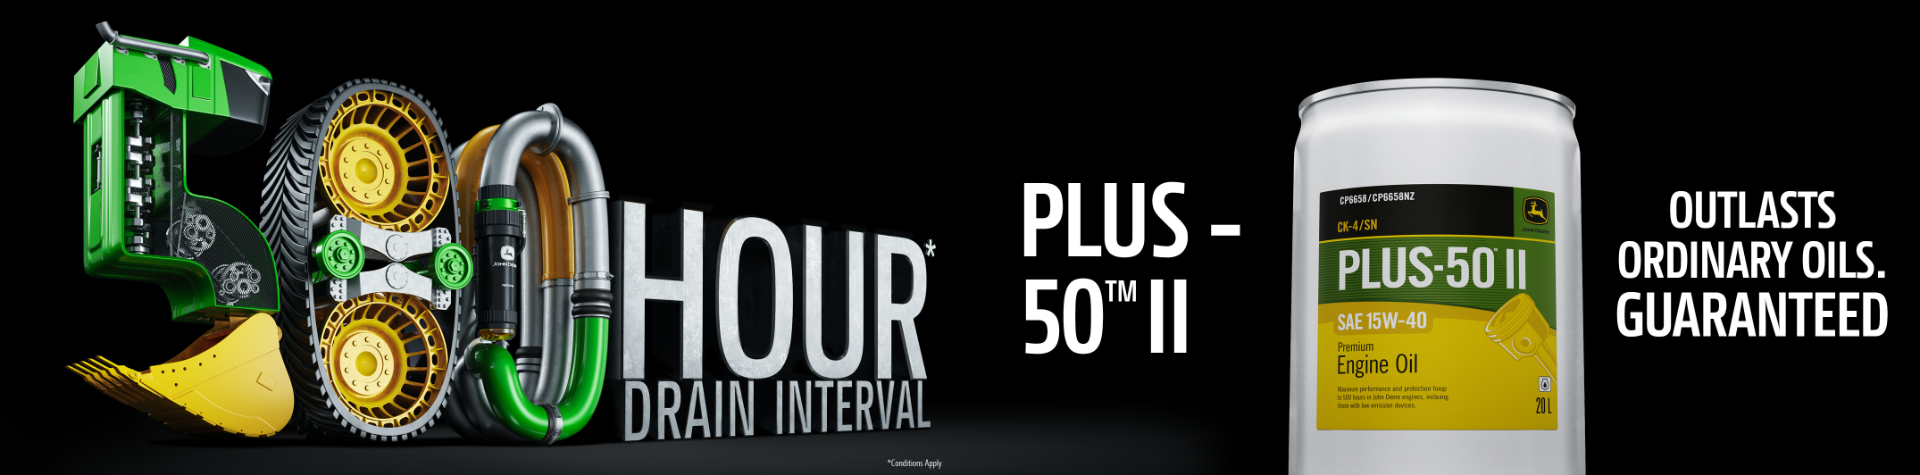 500 Hour* Drain Interval Banner Image